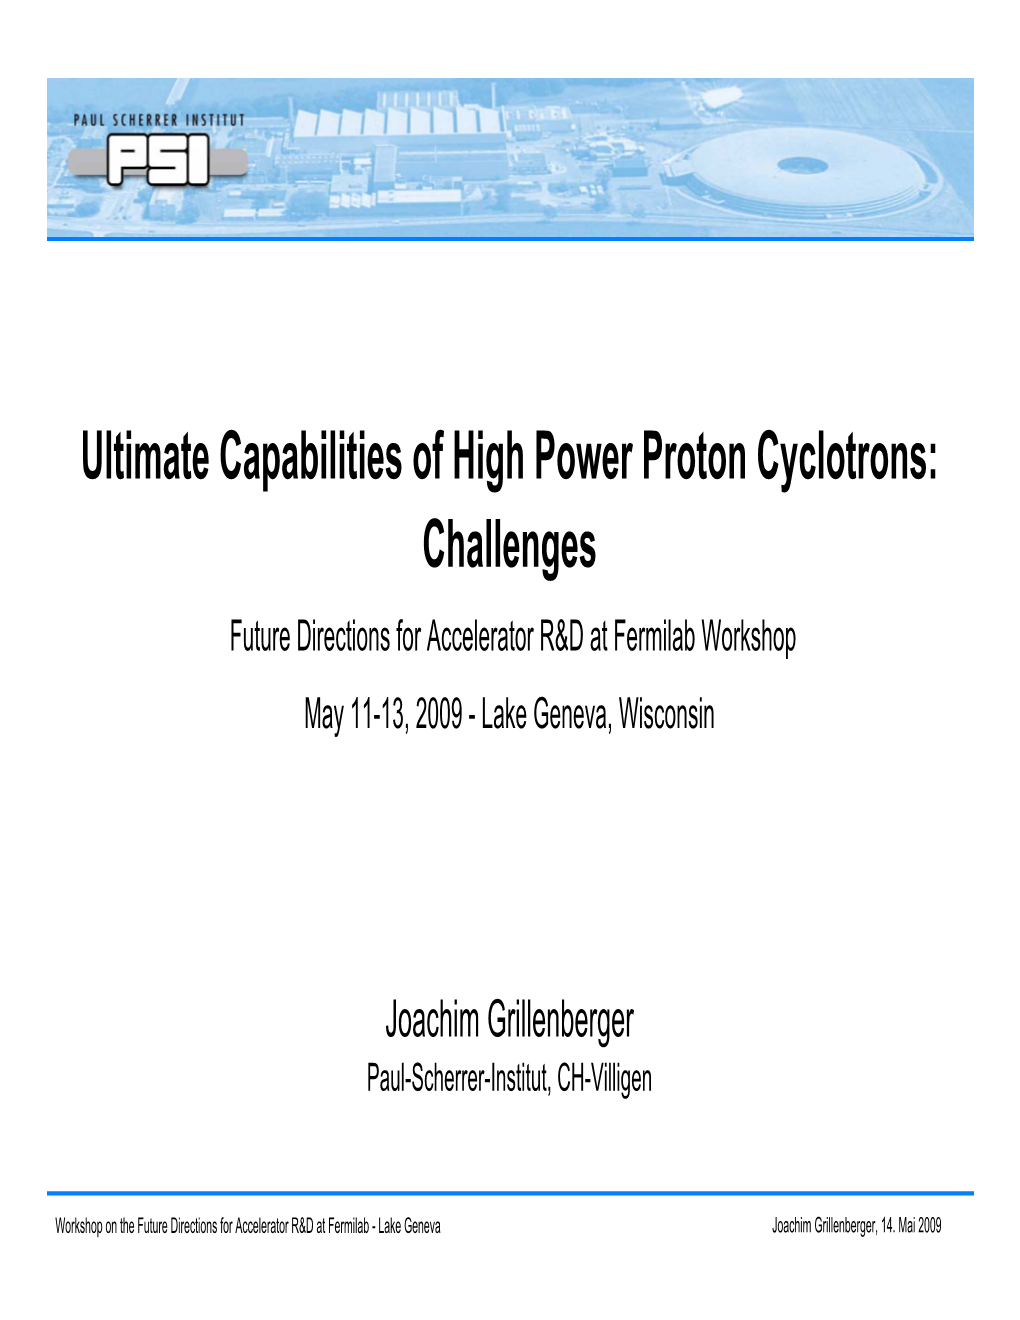 Ultimate Capabilities of High Power Proton Cyclotrons: Challenges Future Directions for Accelerator R&D at Fermilab Workshop May 11-13, 2009 - Lake Geneva, Wisconsin